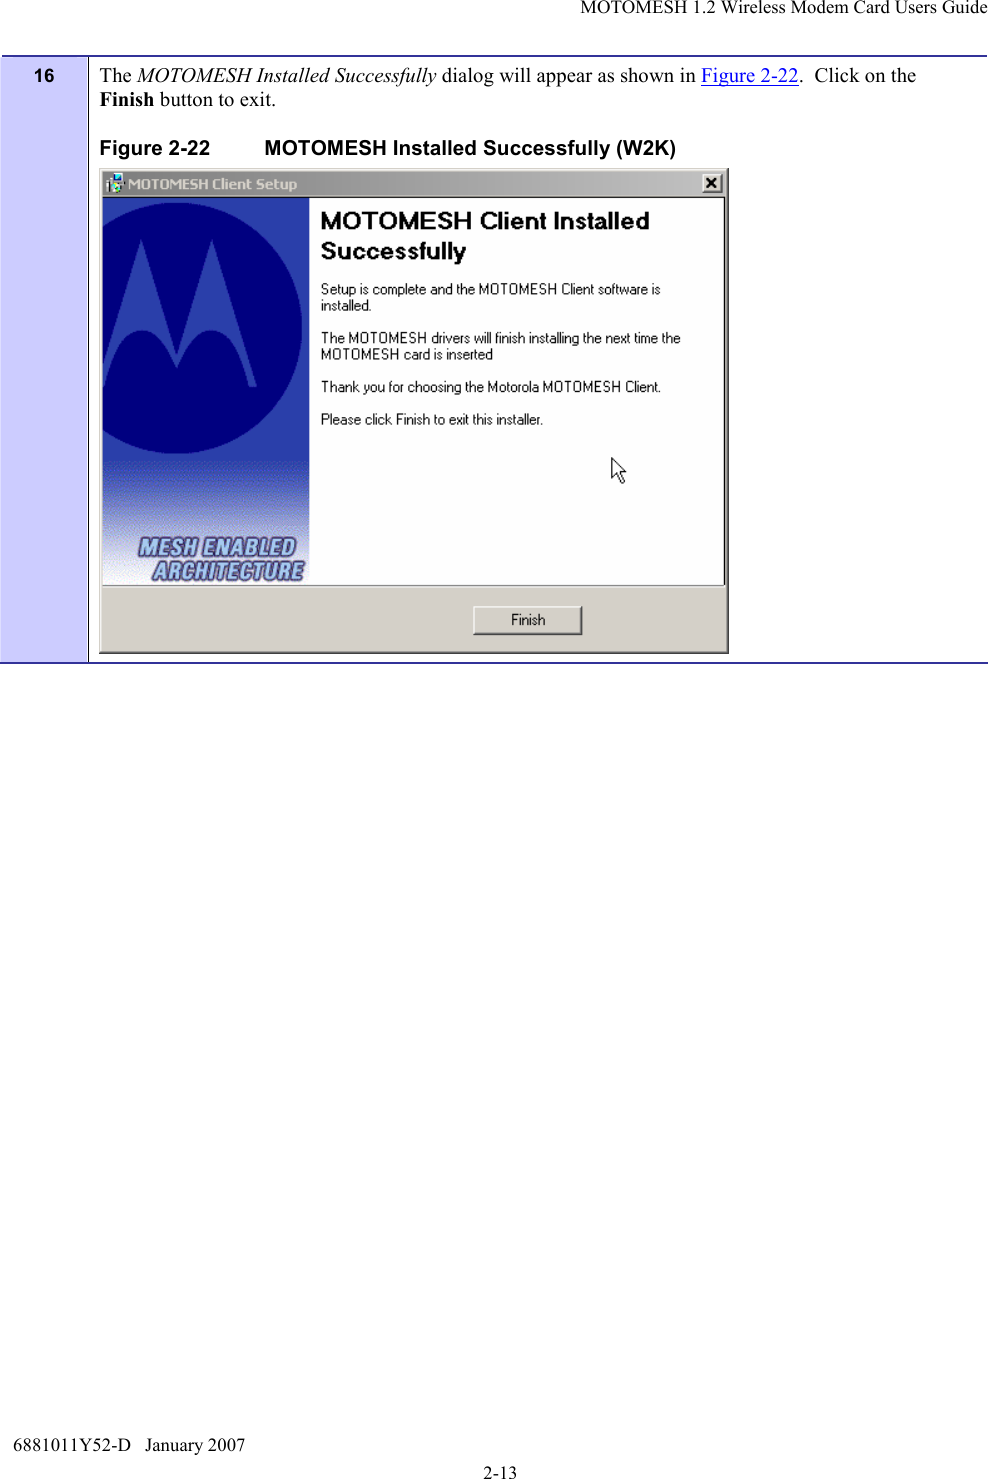 MOTOMESH 1.2 Wireless Modem Card Users Guide 6881011Y52-D   January 2007 2-13 16  The MOTOMESH Installed Successfully dialog will appear as shown in Figure 2-22.  Click on the Finish button to exit. Figure 2-22  MOTOMESH Installed Successfully (W2K)  